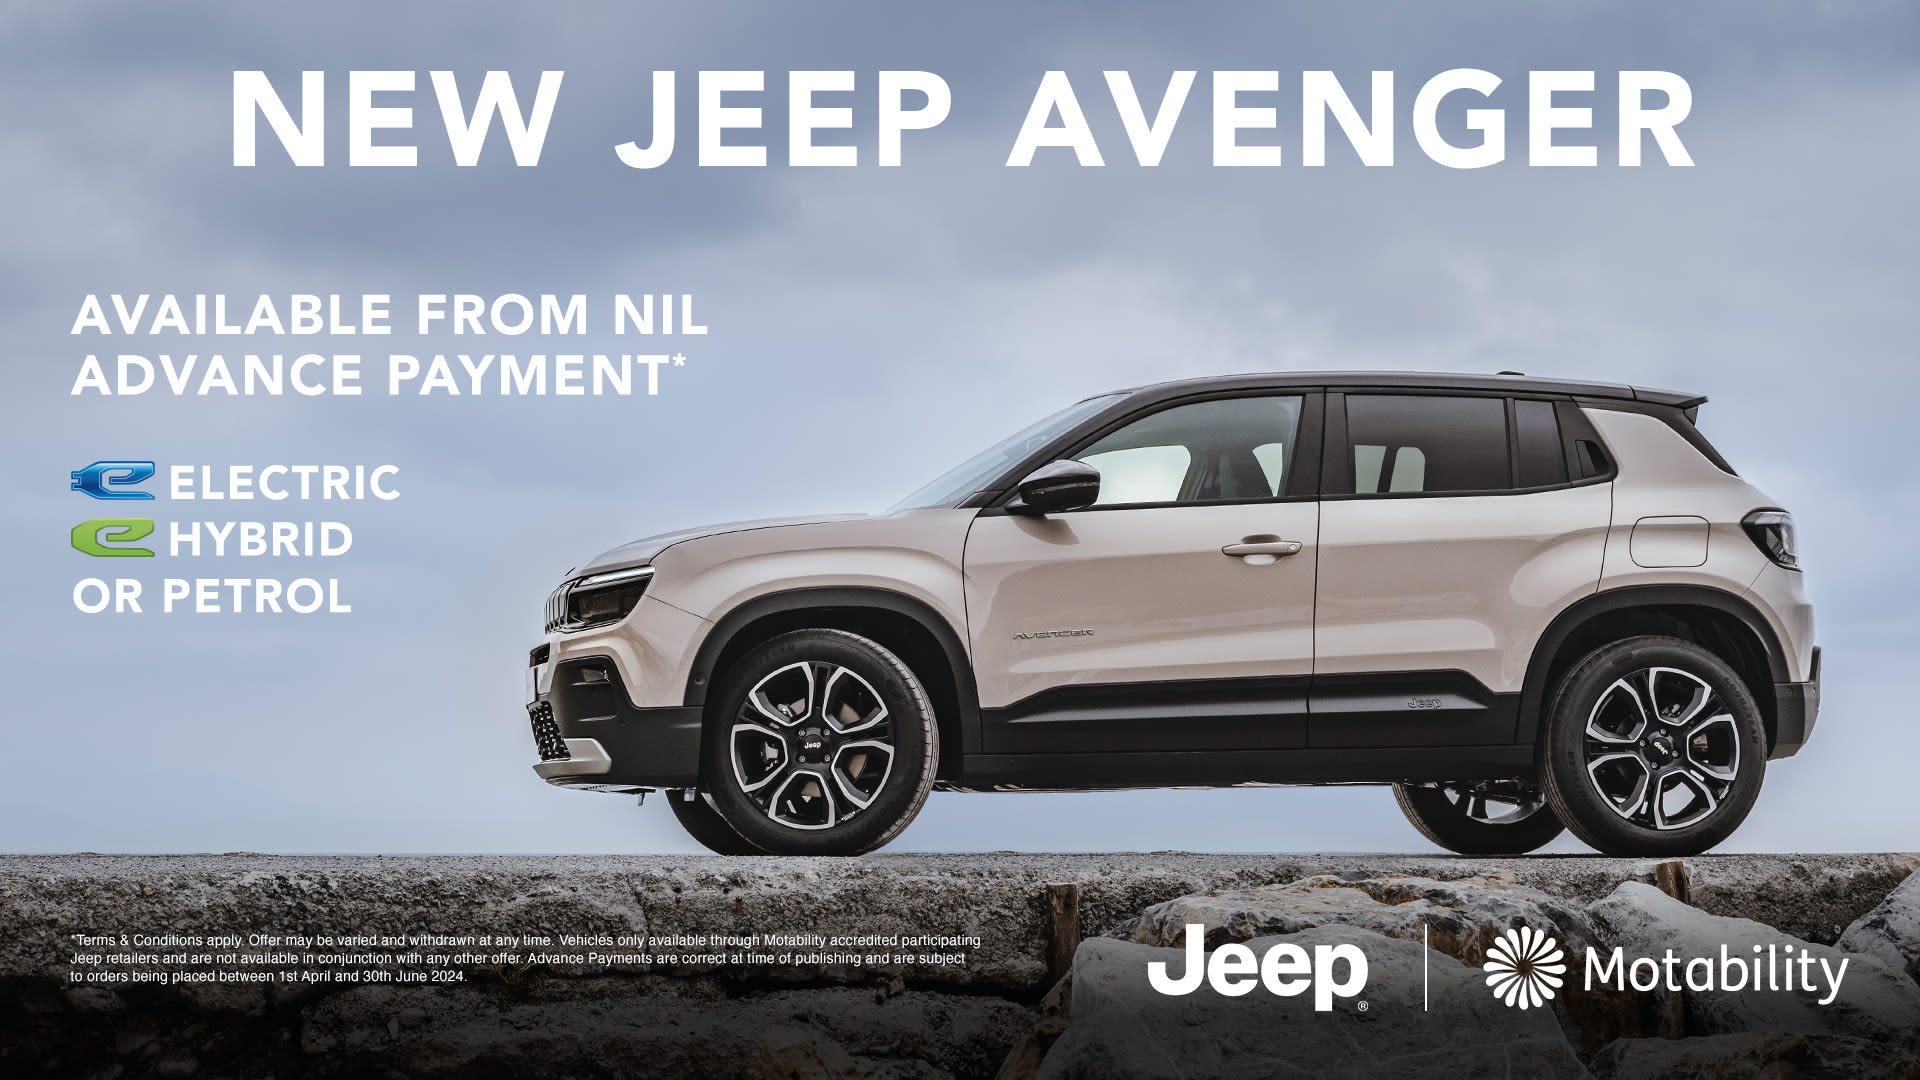 New Jeep Avenger Motability from Nil Advance Payment